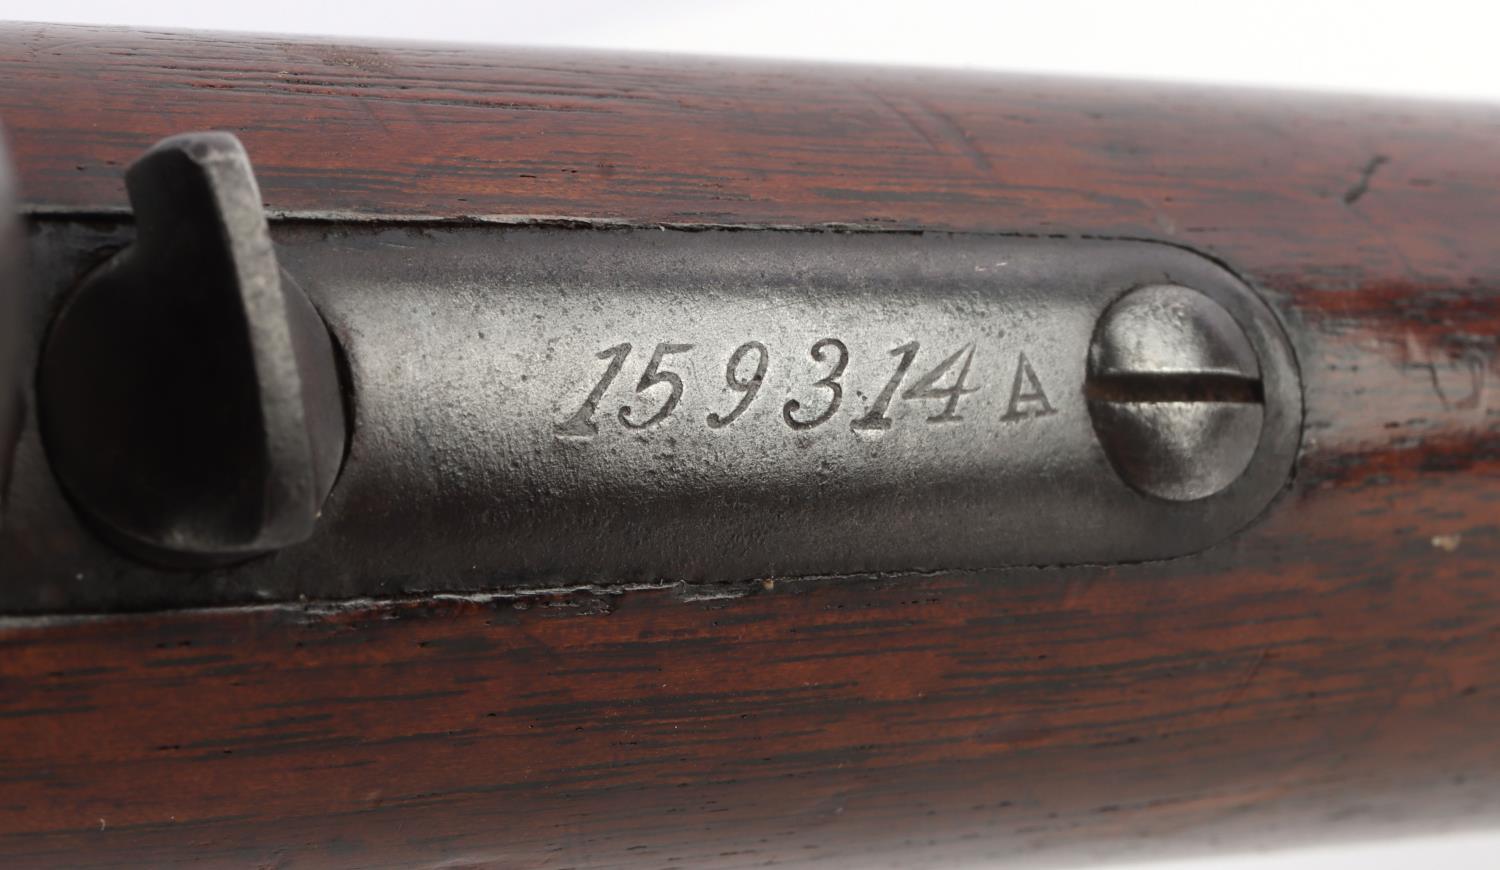 1884 WINCHESTER MODEL 1873 LEVER ACTION RIFLE